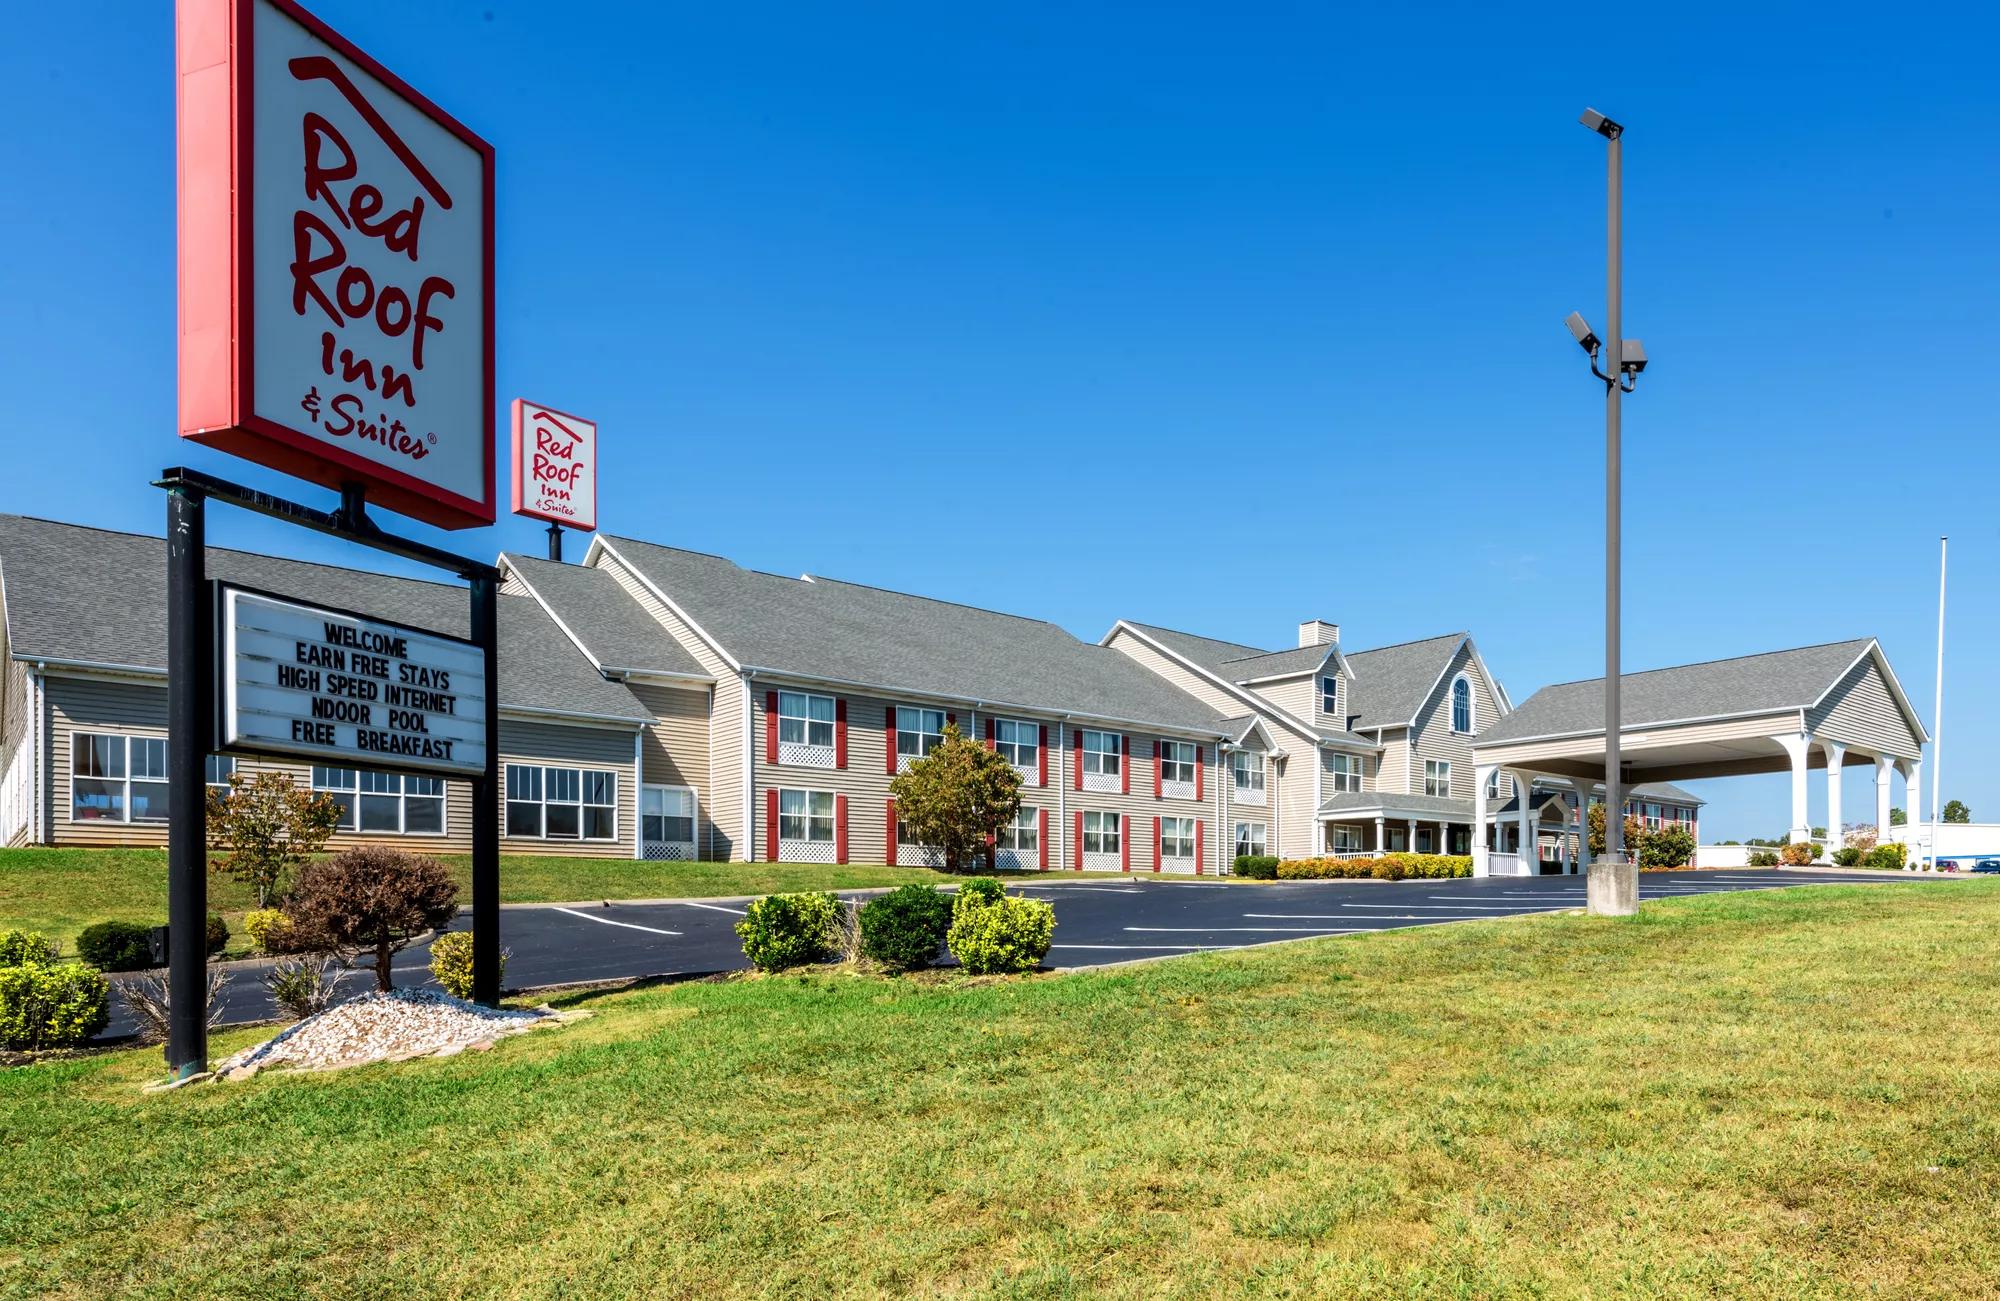 Red Roof Inn & Suites Knoxville East Property Exterior Image